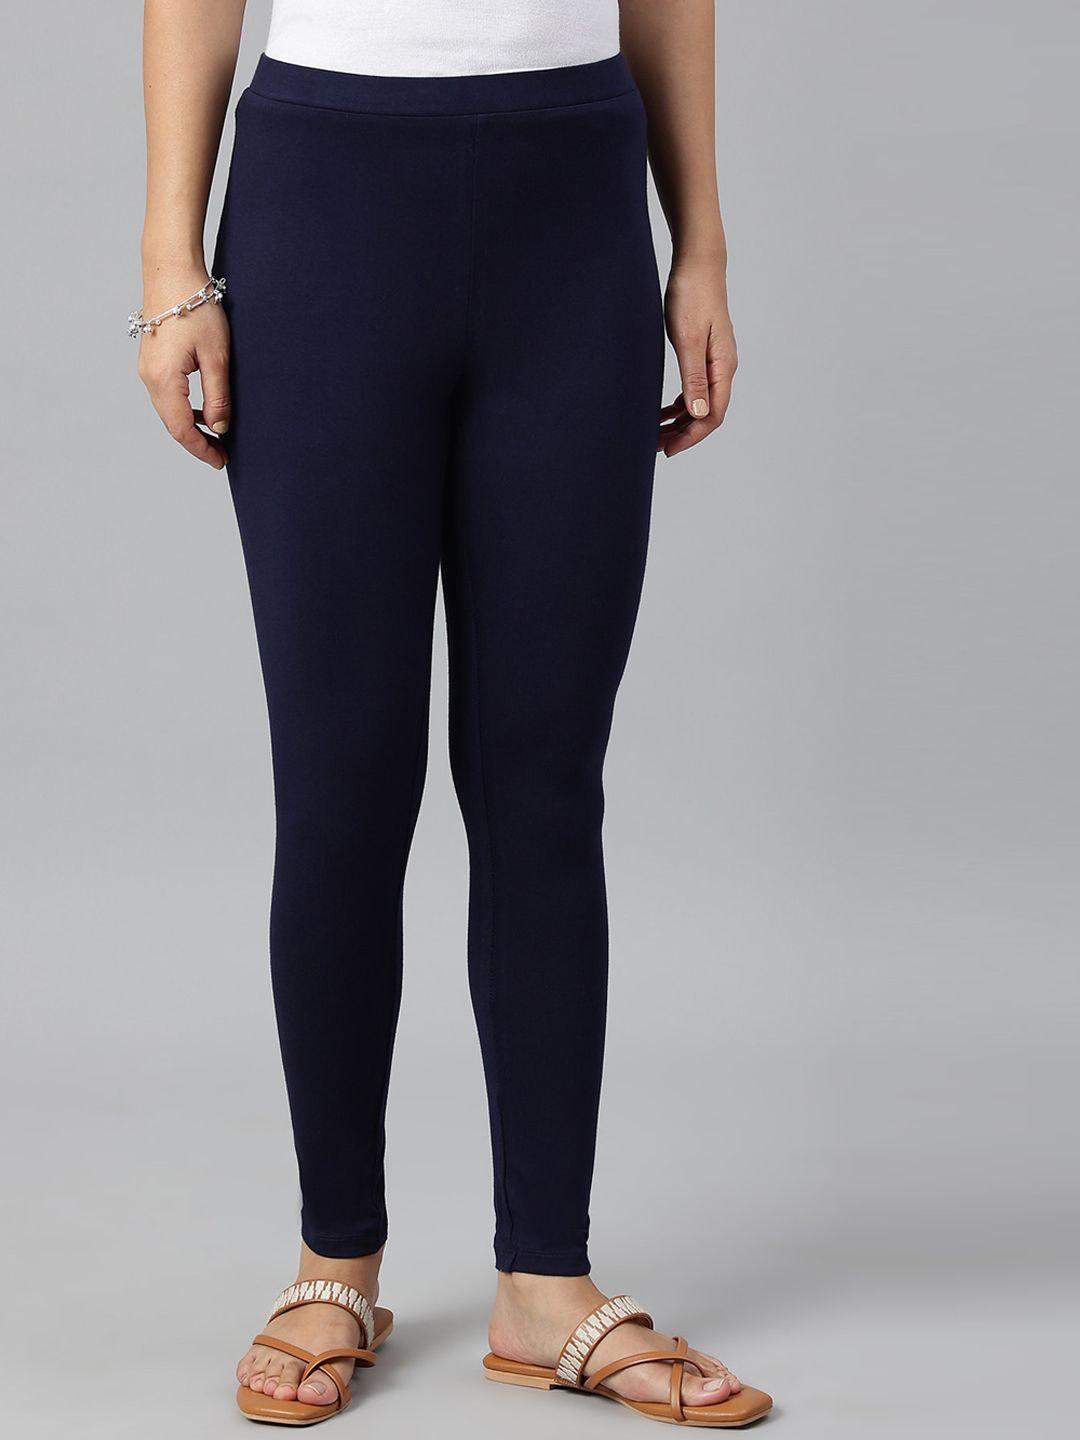 W Women Navy Solid Ankle-Length Leggings Price in India